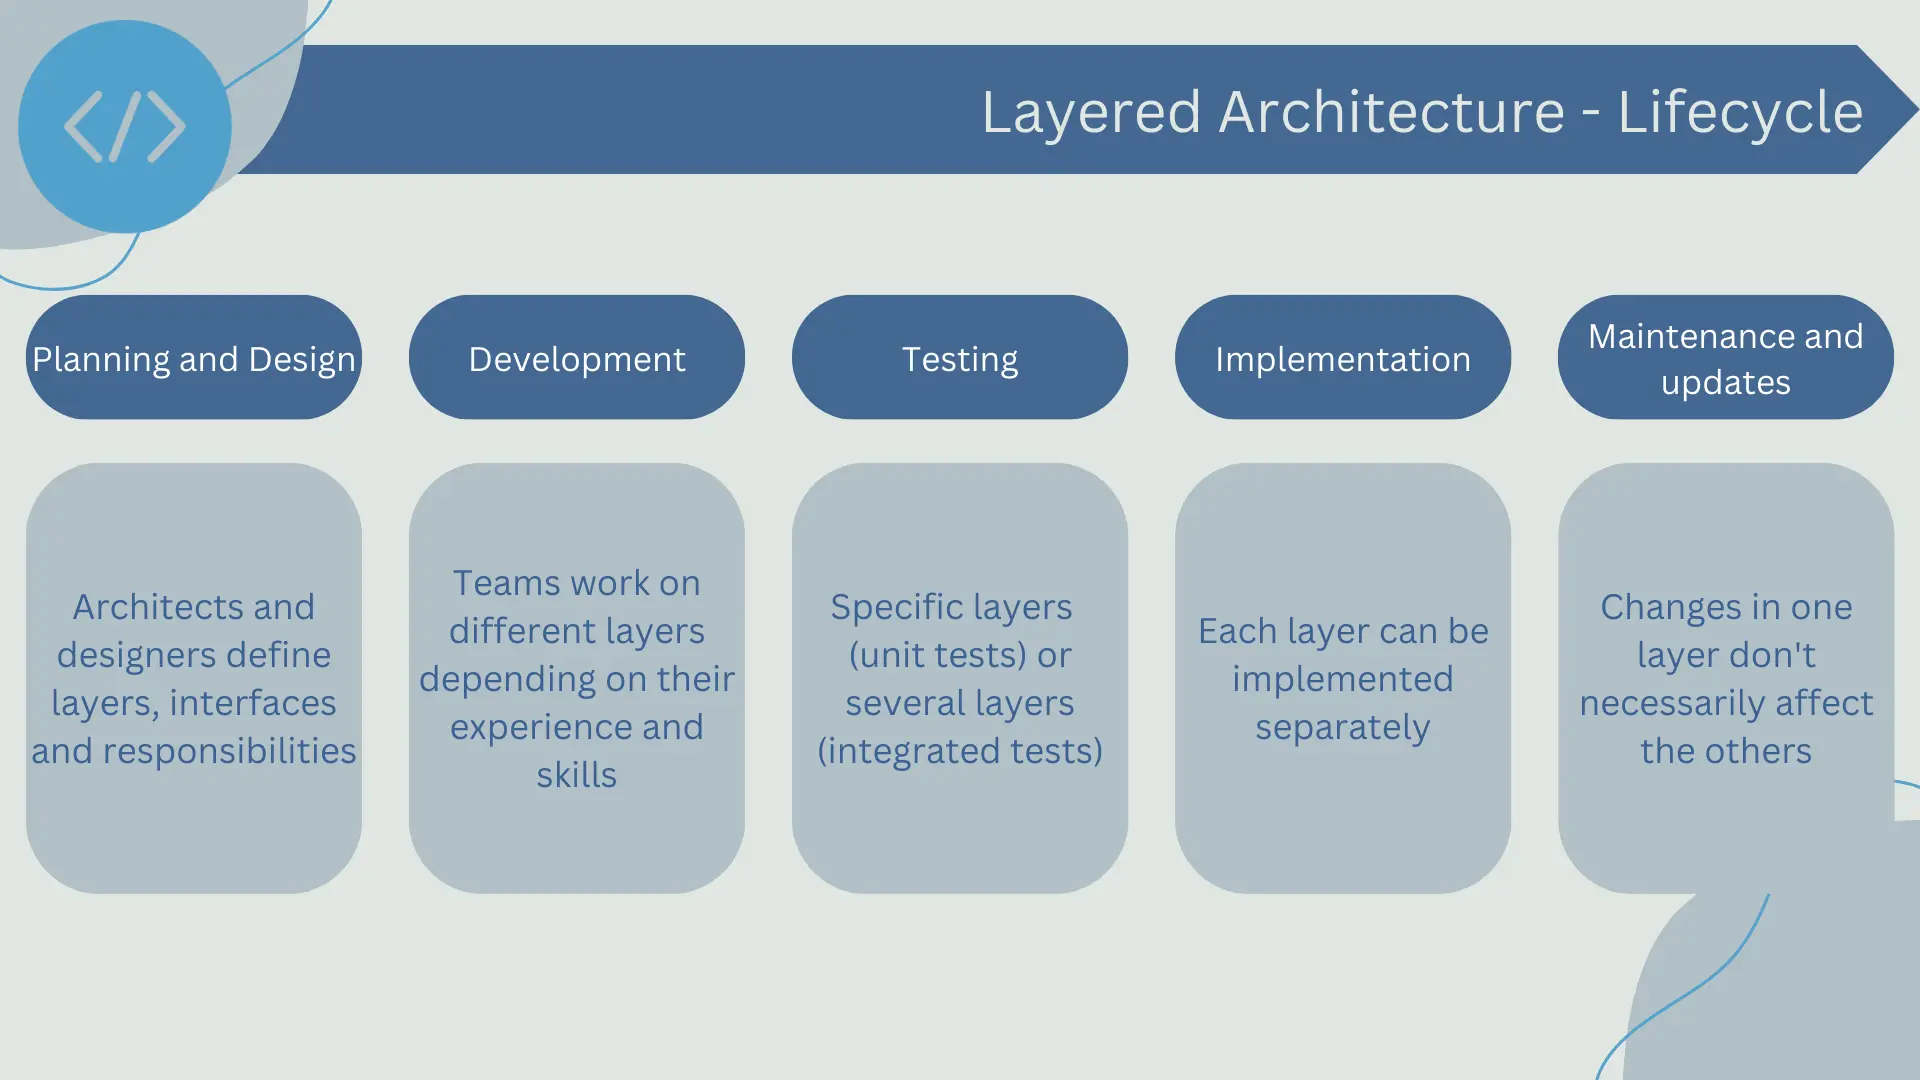 Lifecycle in layered architecture